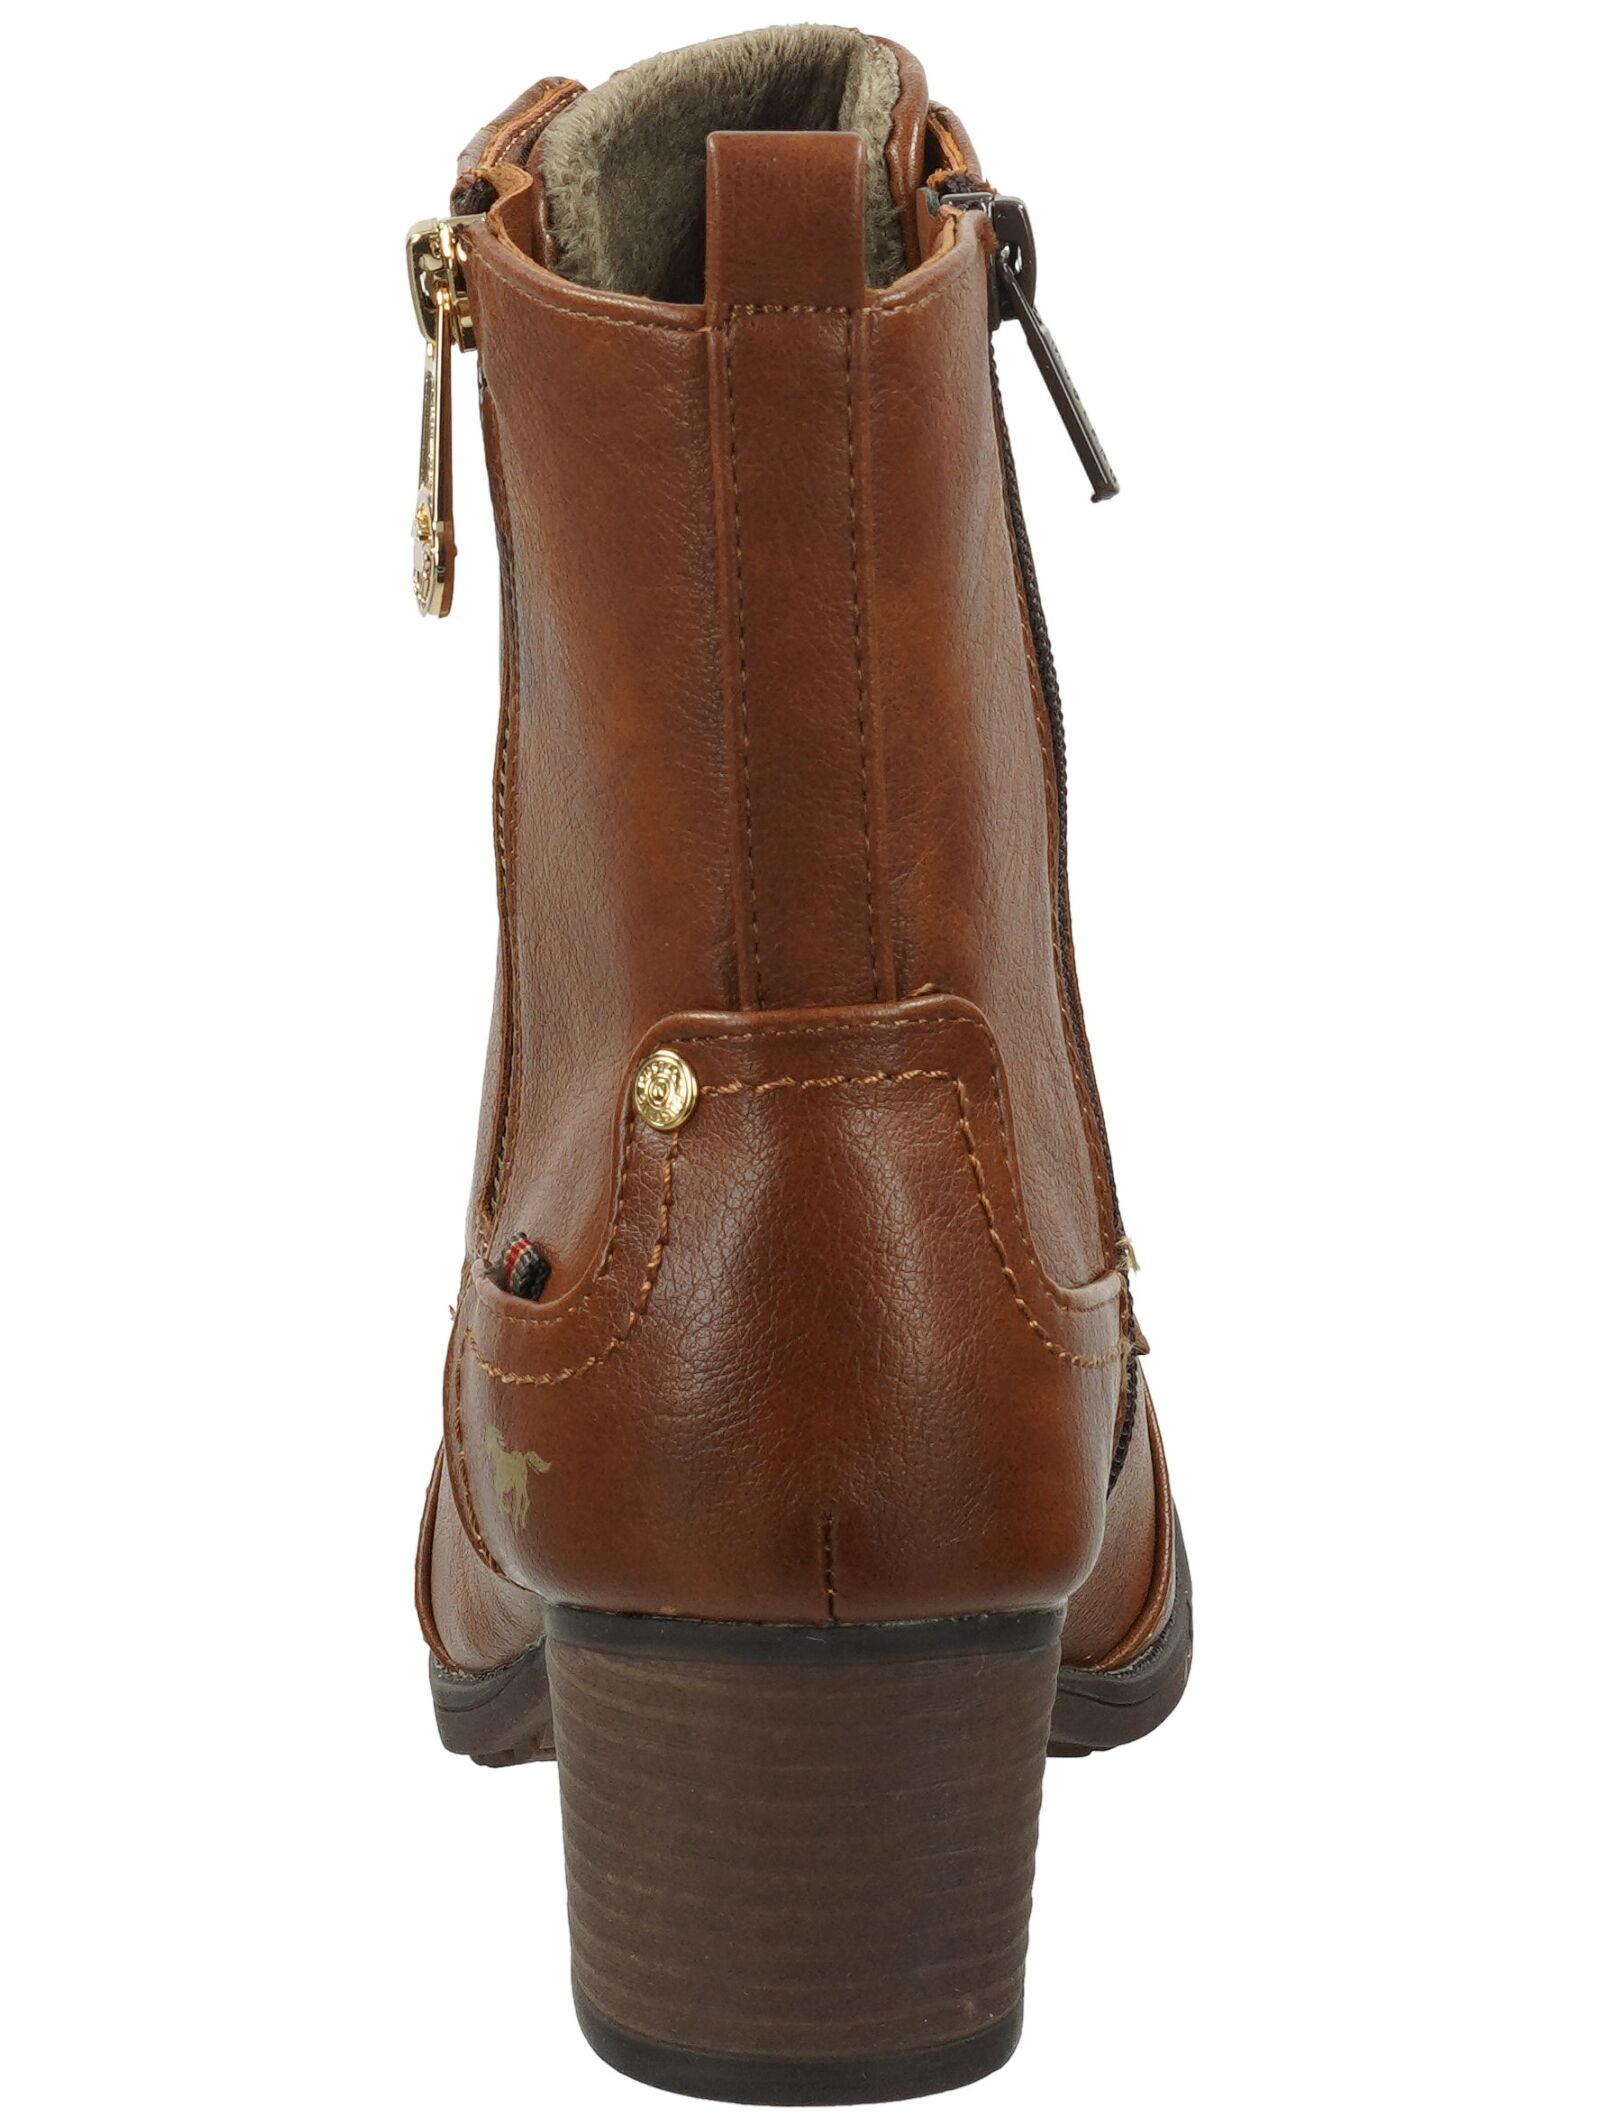 Mustang  Stiefelette 1197-512 